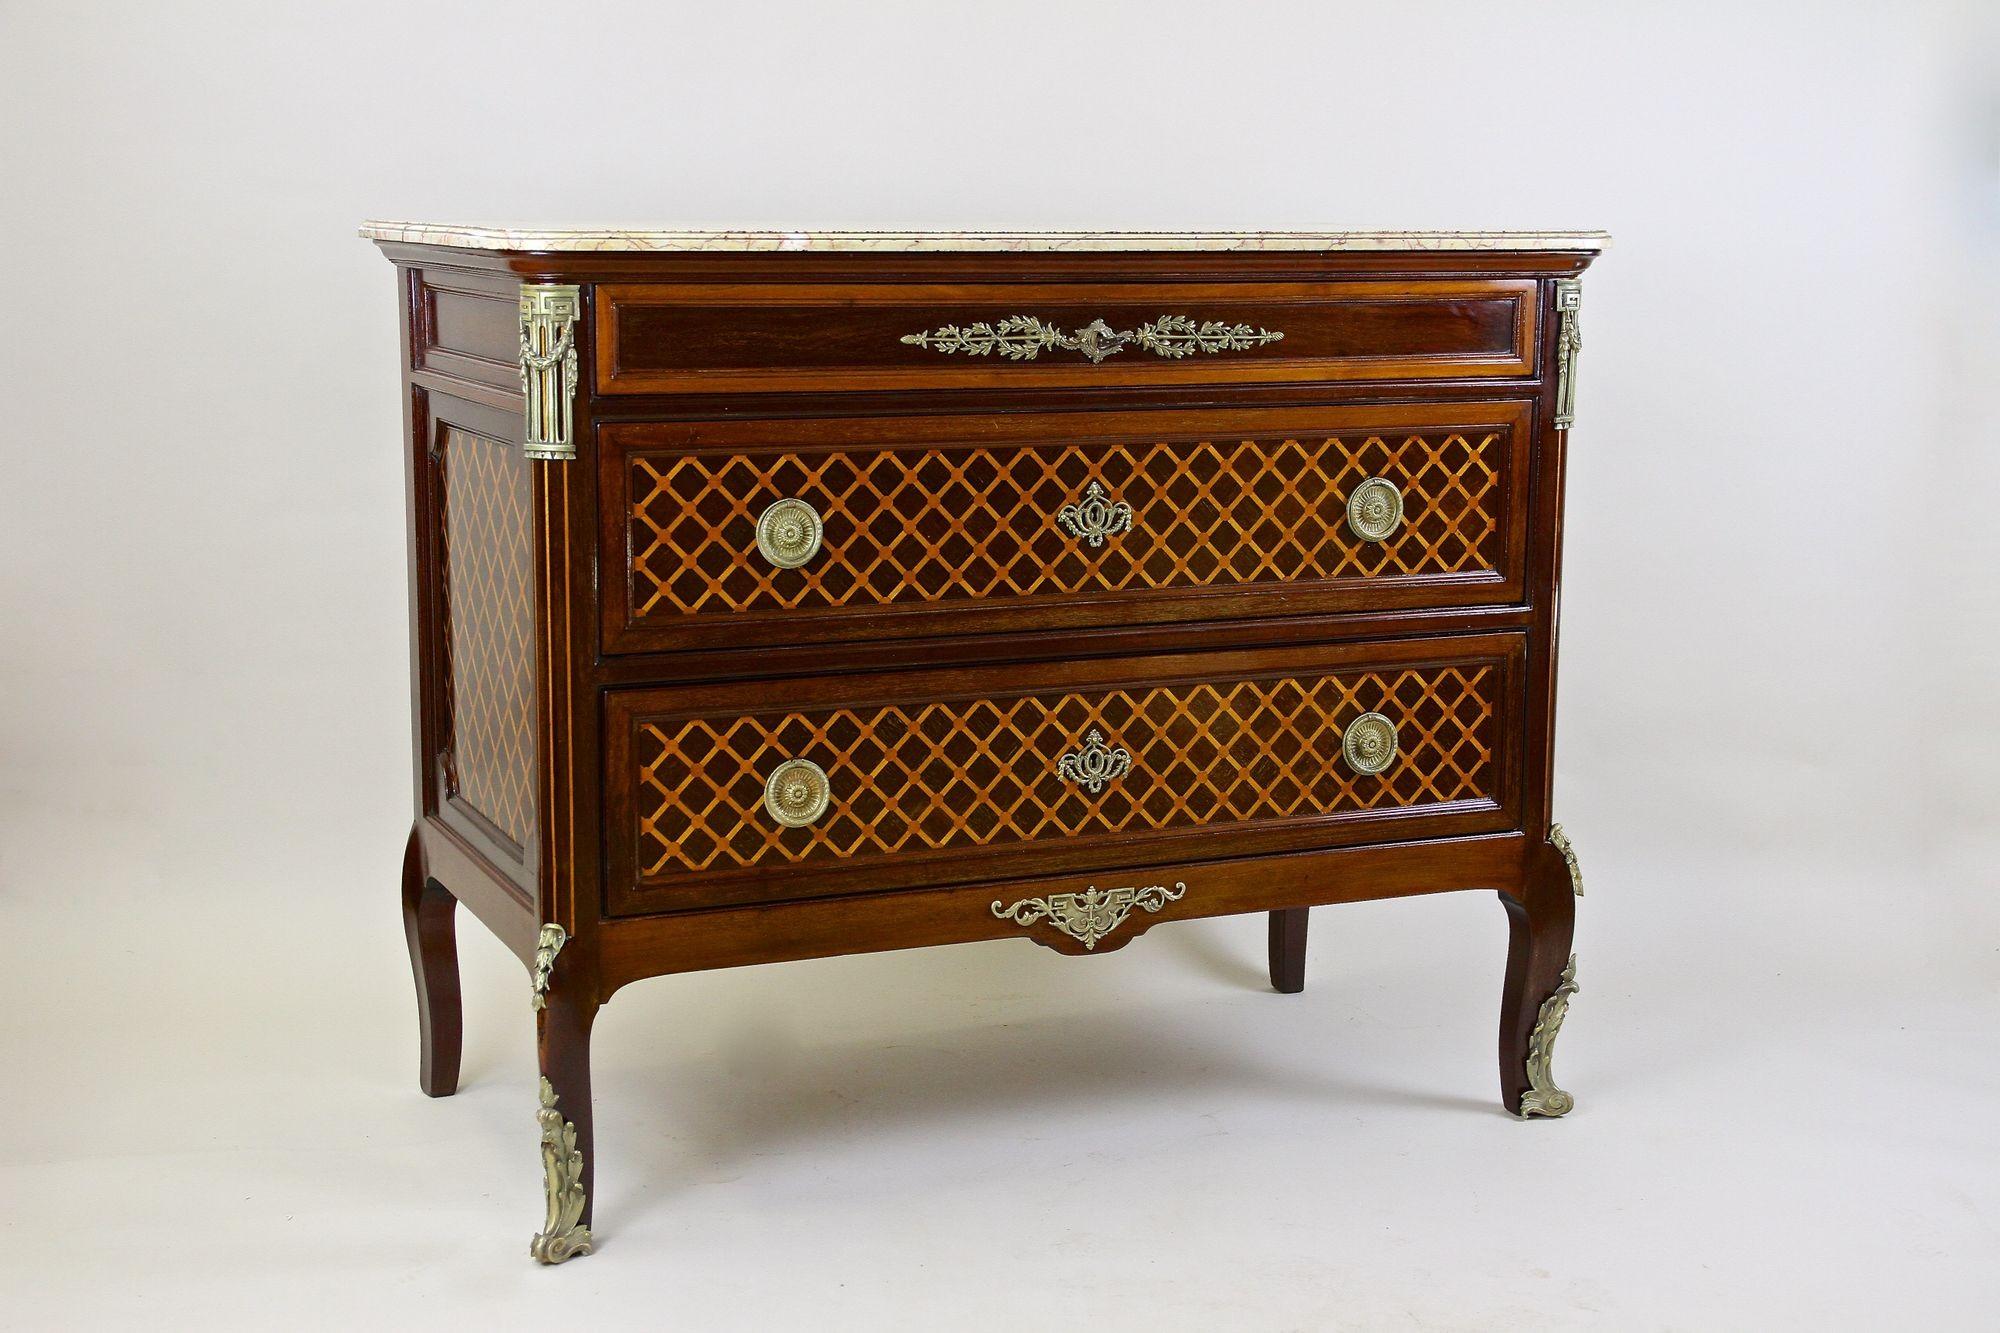 19th Century Mahogany Chest Of Drawers With Marquetry Works, France circa 1870 For Sale 2